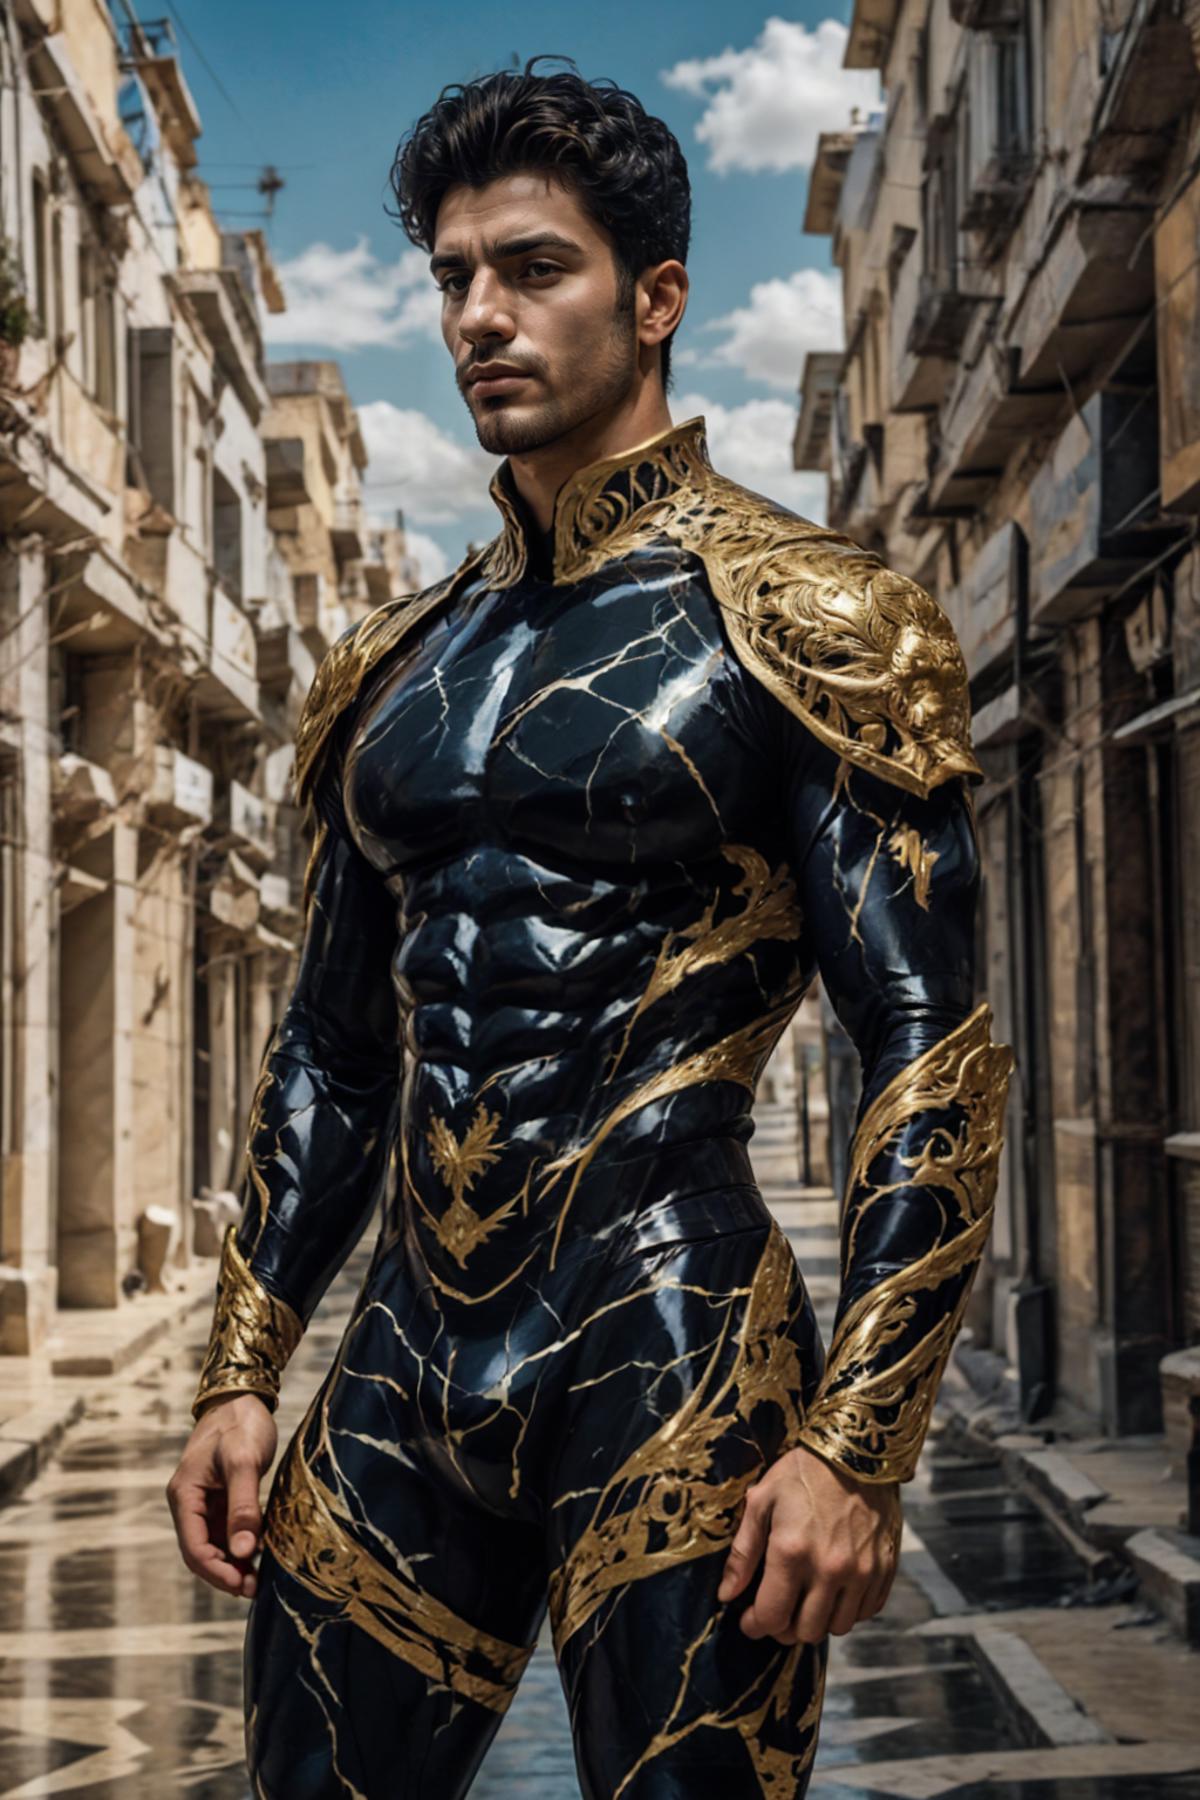 Gold Black Marble Armor image by Kairen92